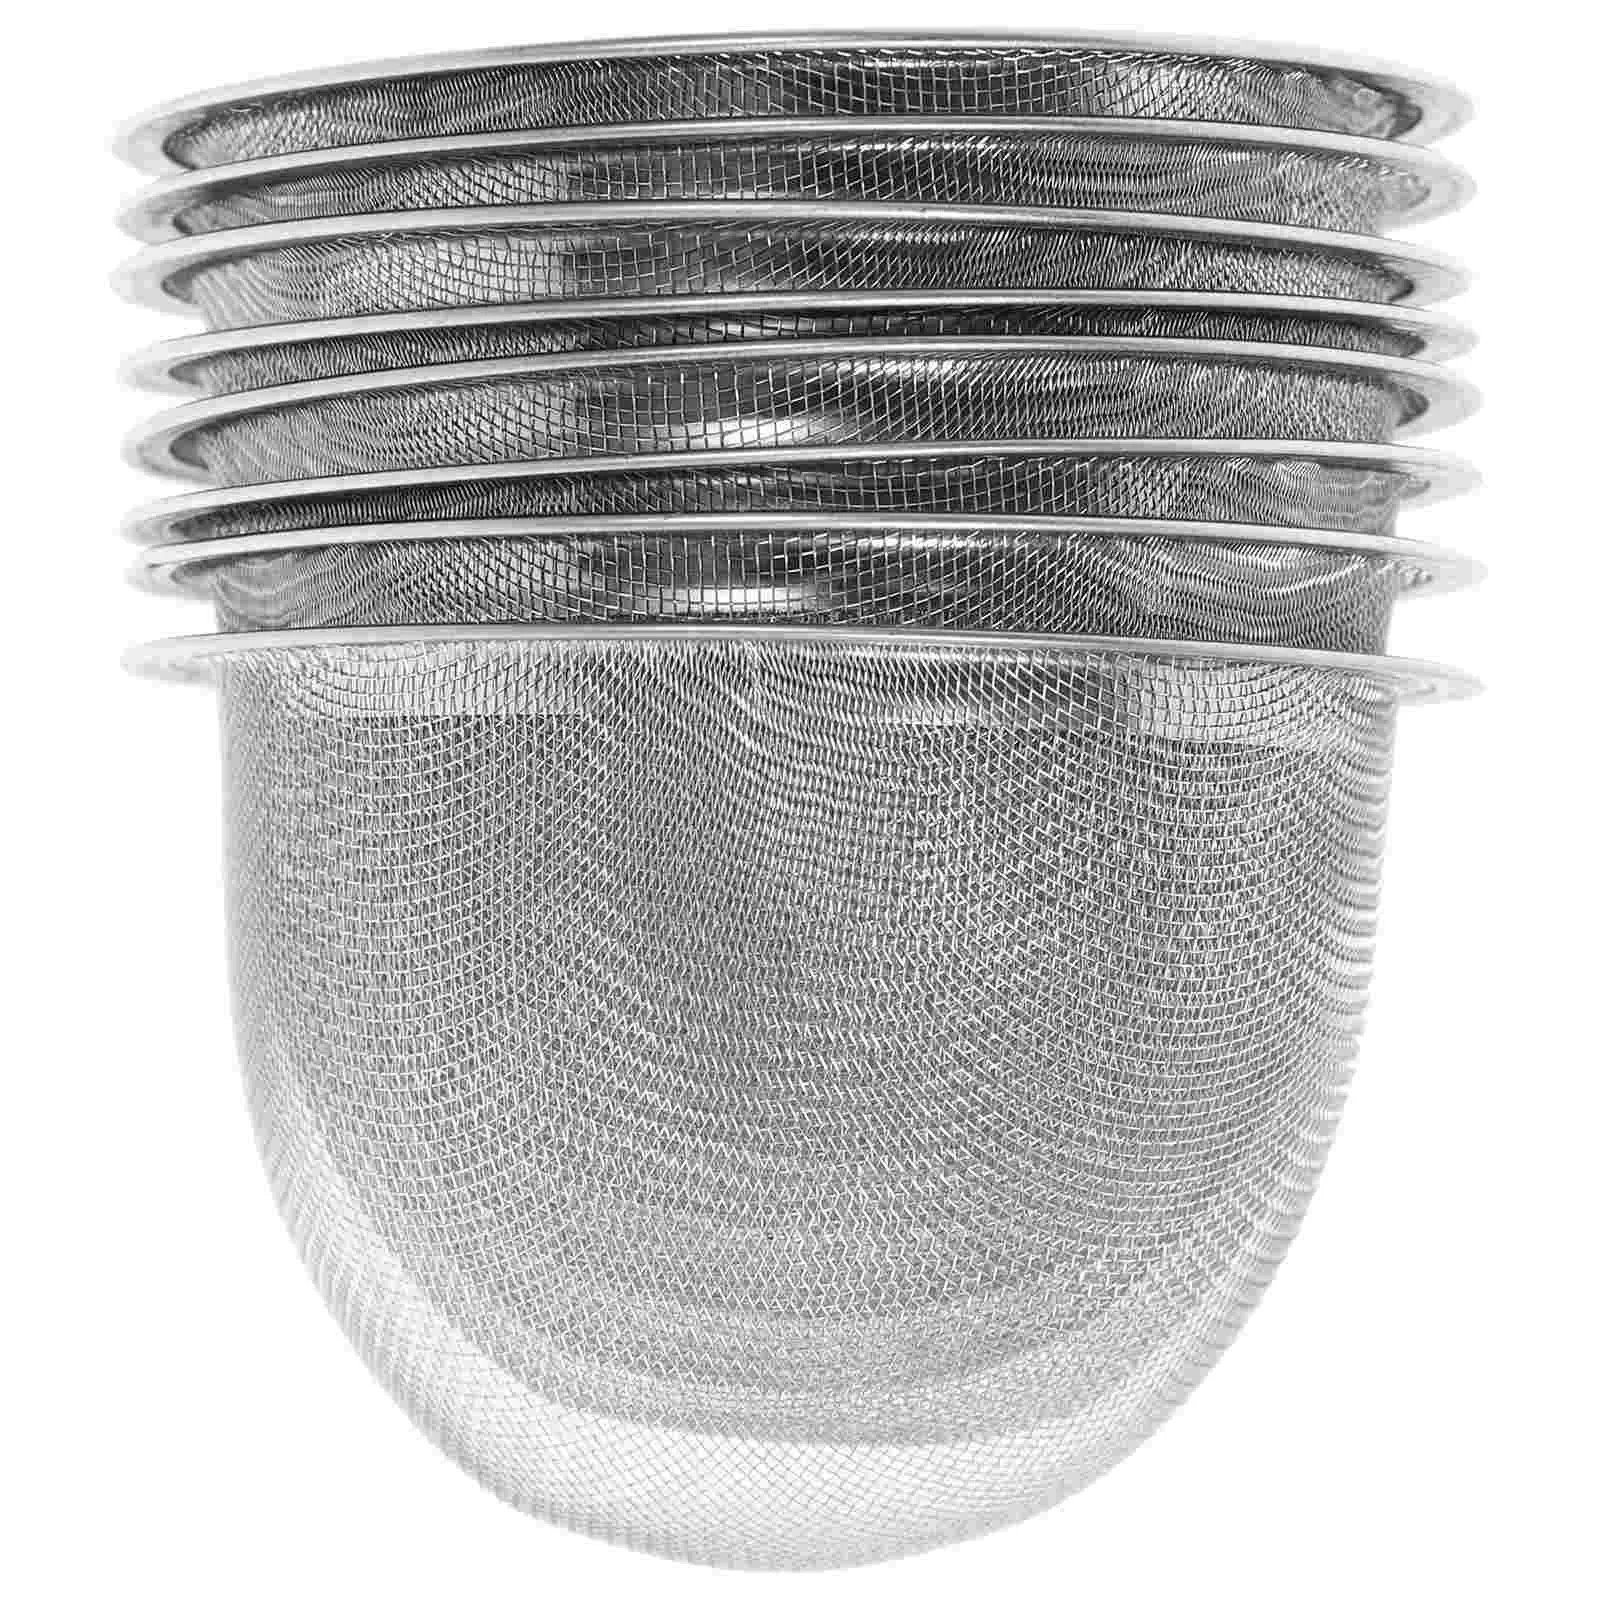 

Healeved Coffee Filter 8Pcs Teapot Mesh Strainer Replacement Stainless Steel Tea Pot Mesh Strainer Insert Tea Infuser Loose